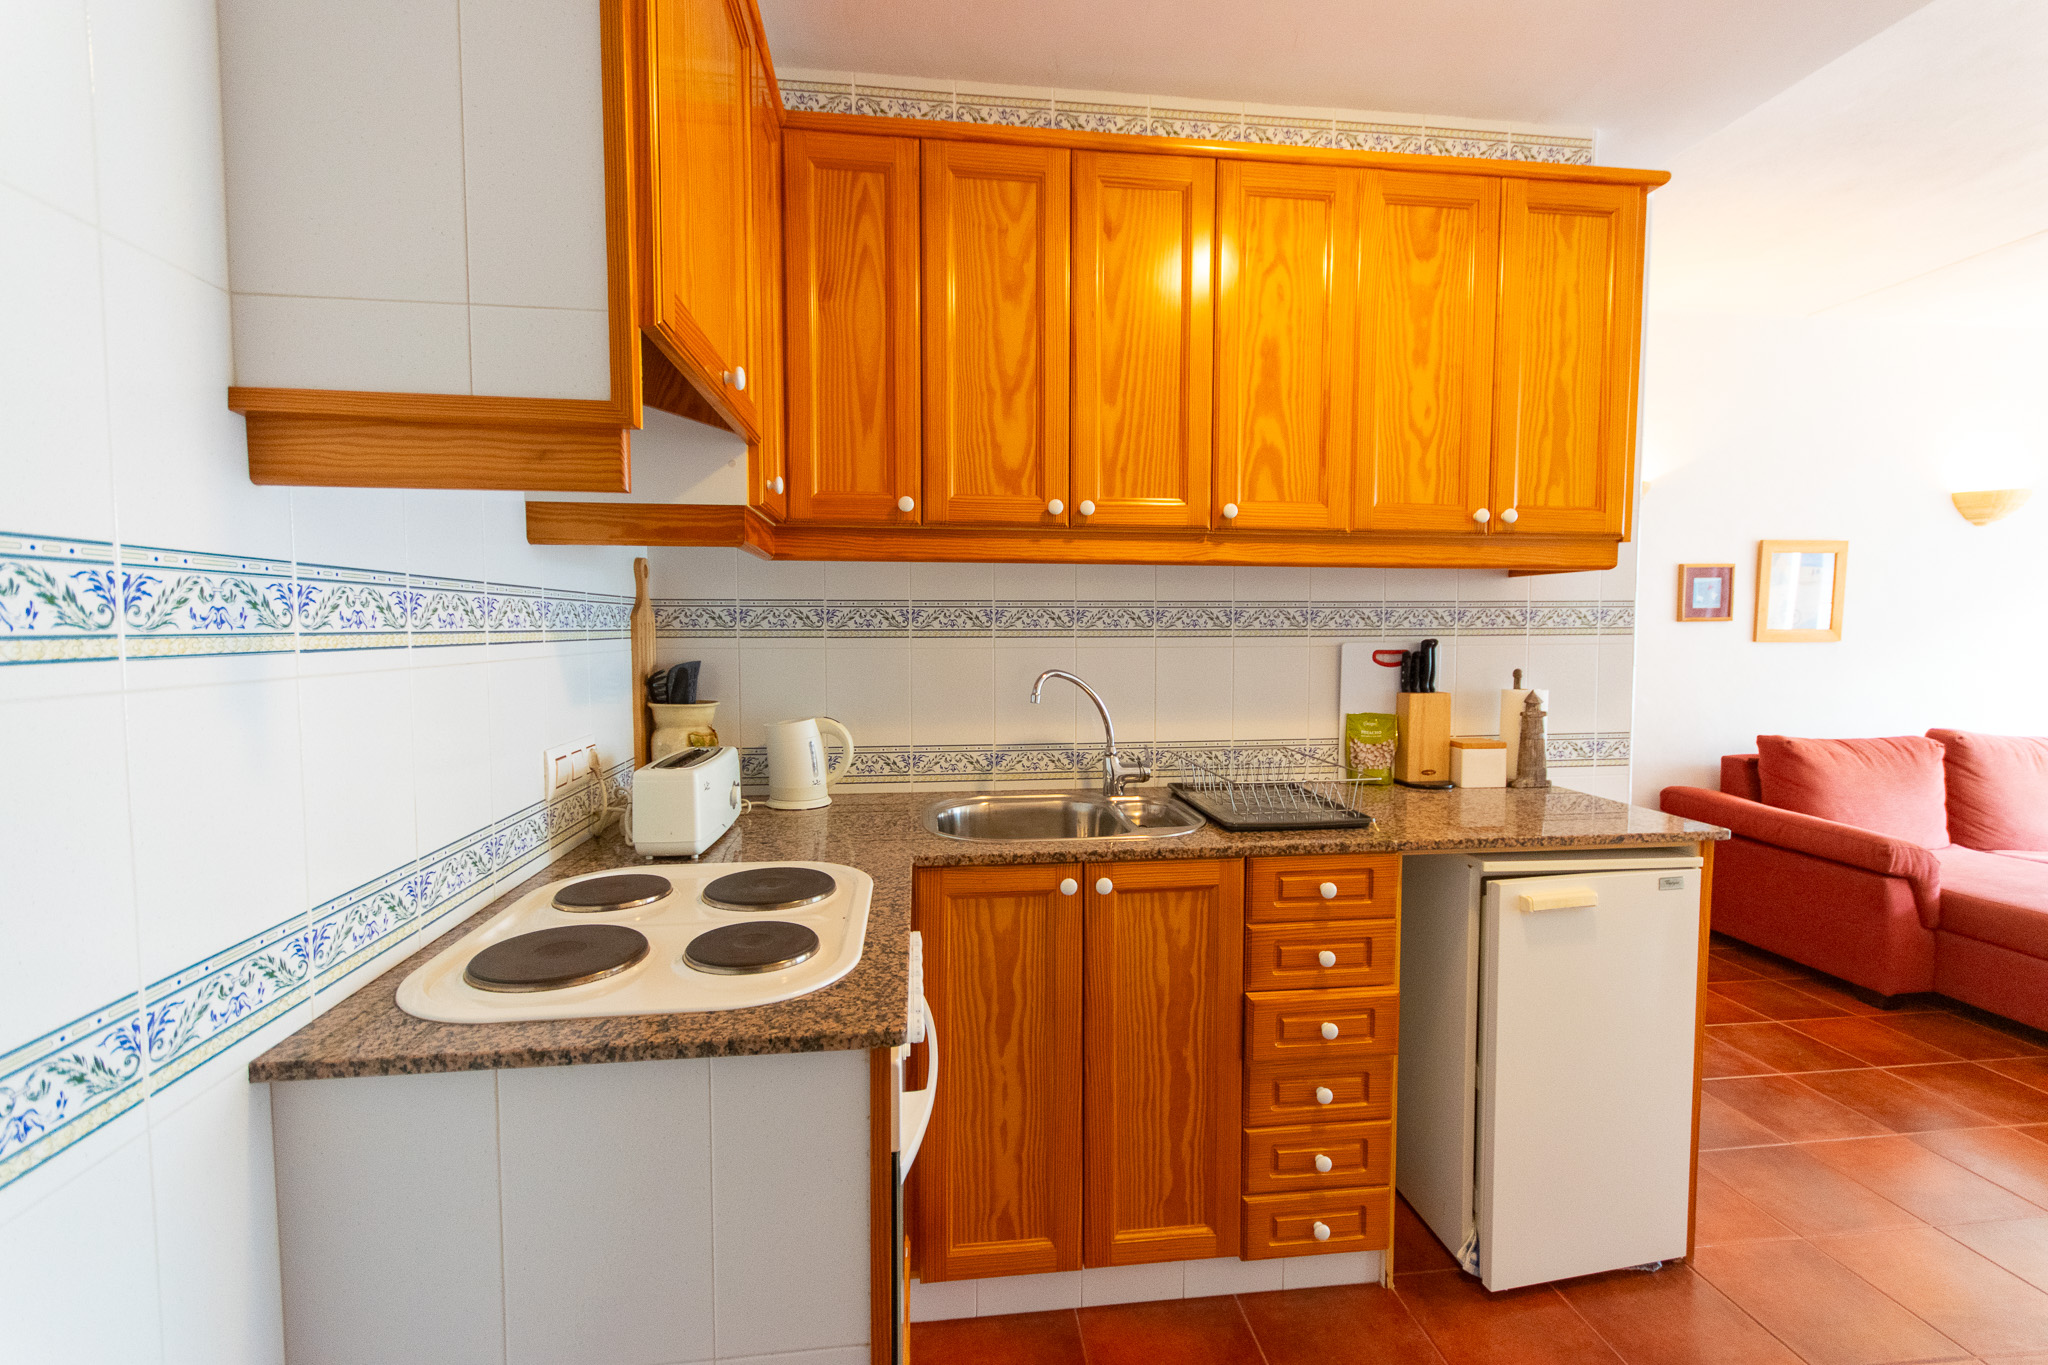 First floor kitchen with balcony in Es Mercadal